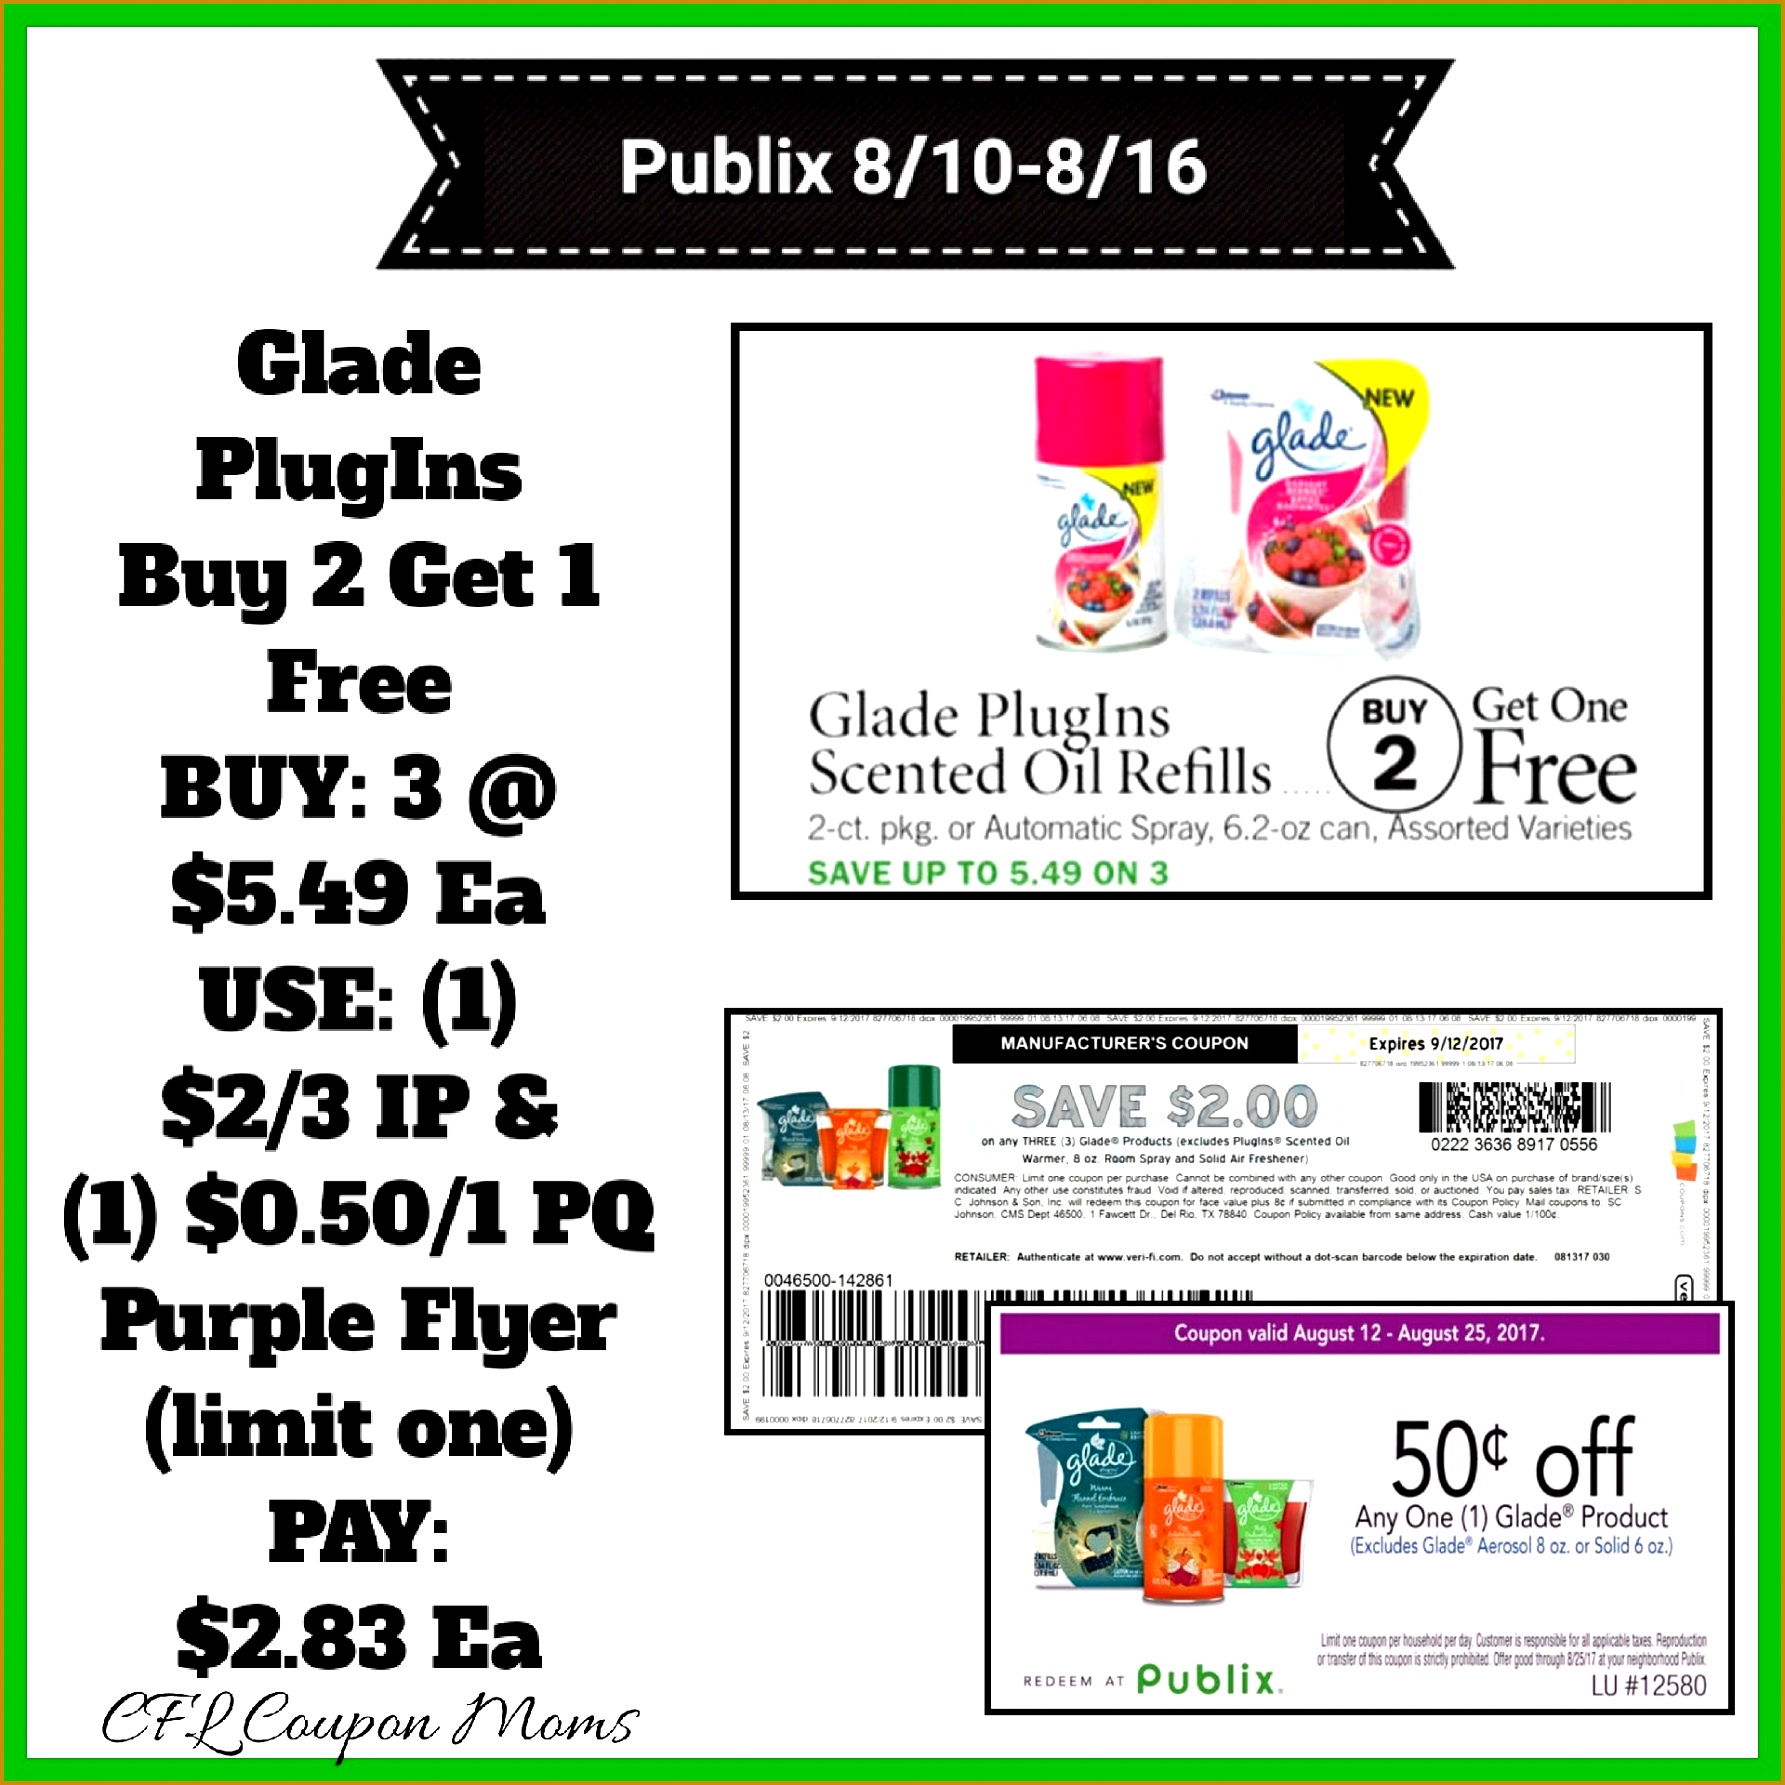 We had a new Printable Coupon pop up this morning along with a Publix Coupon found in the New Purple Flyer 17851785